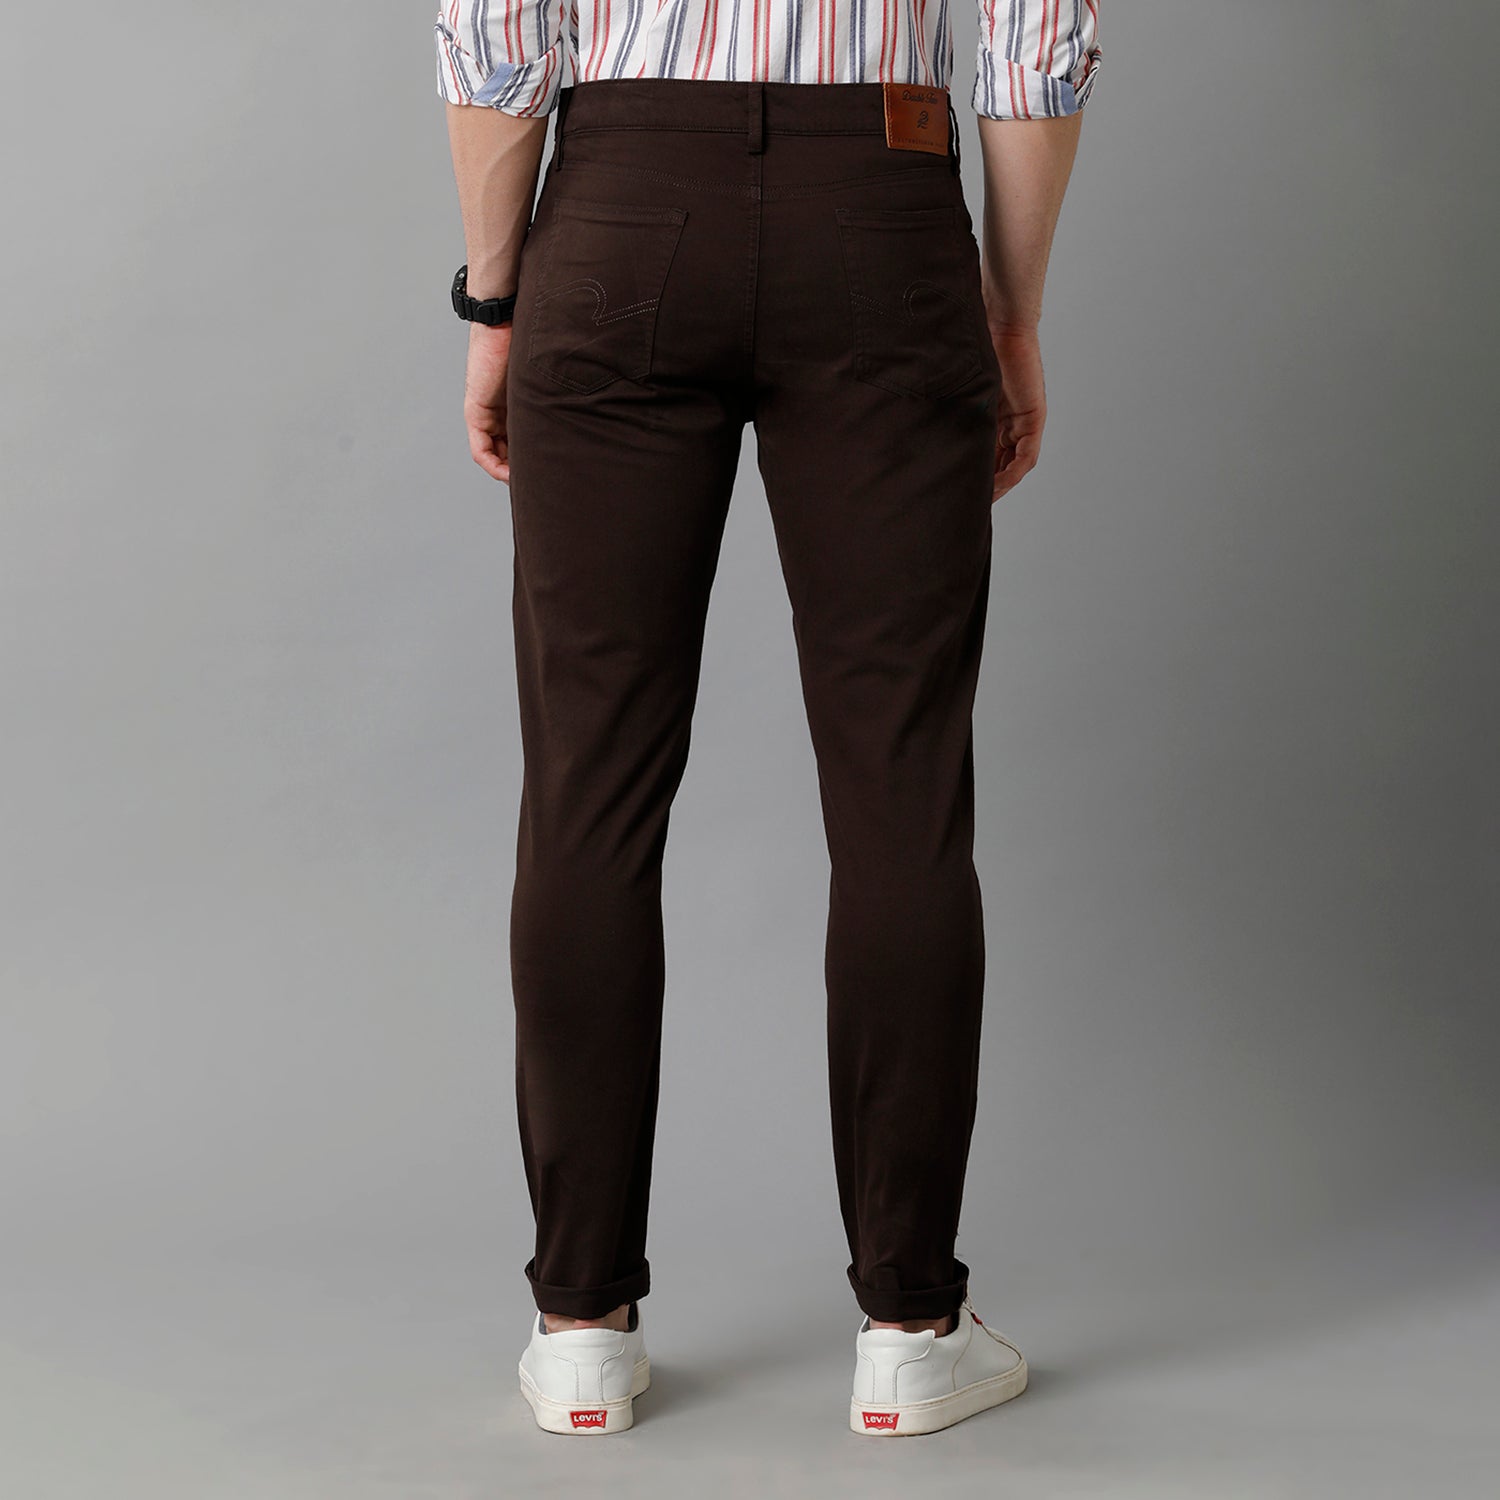 Maroon Solid Casual Cotton Trouser